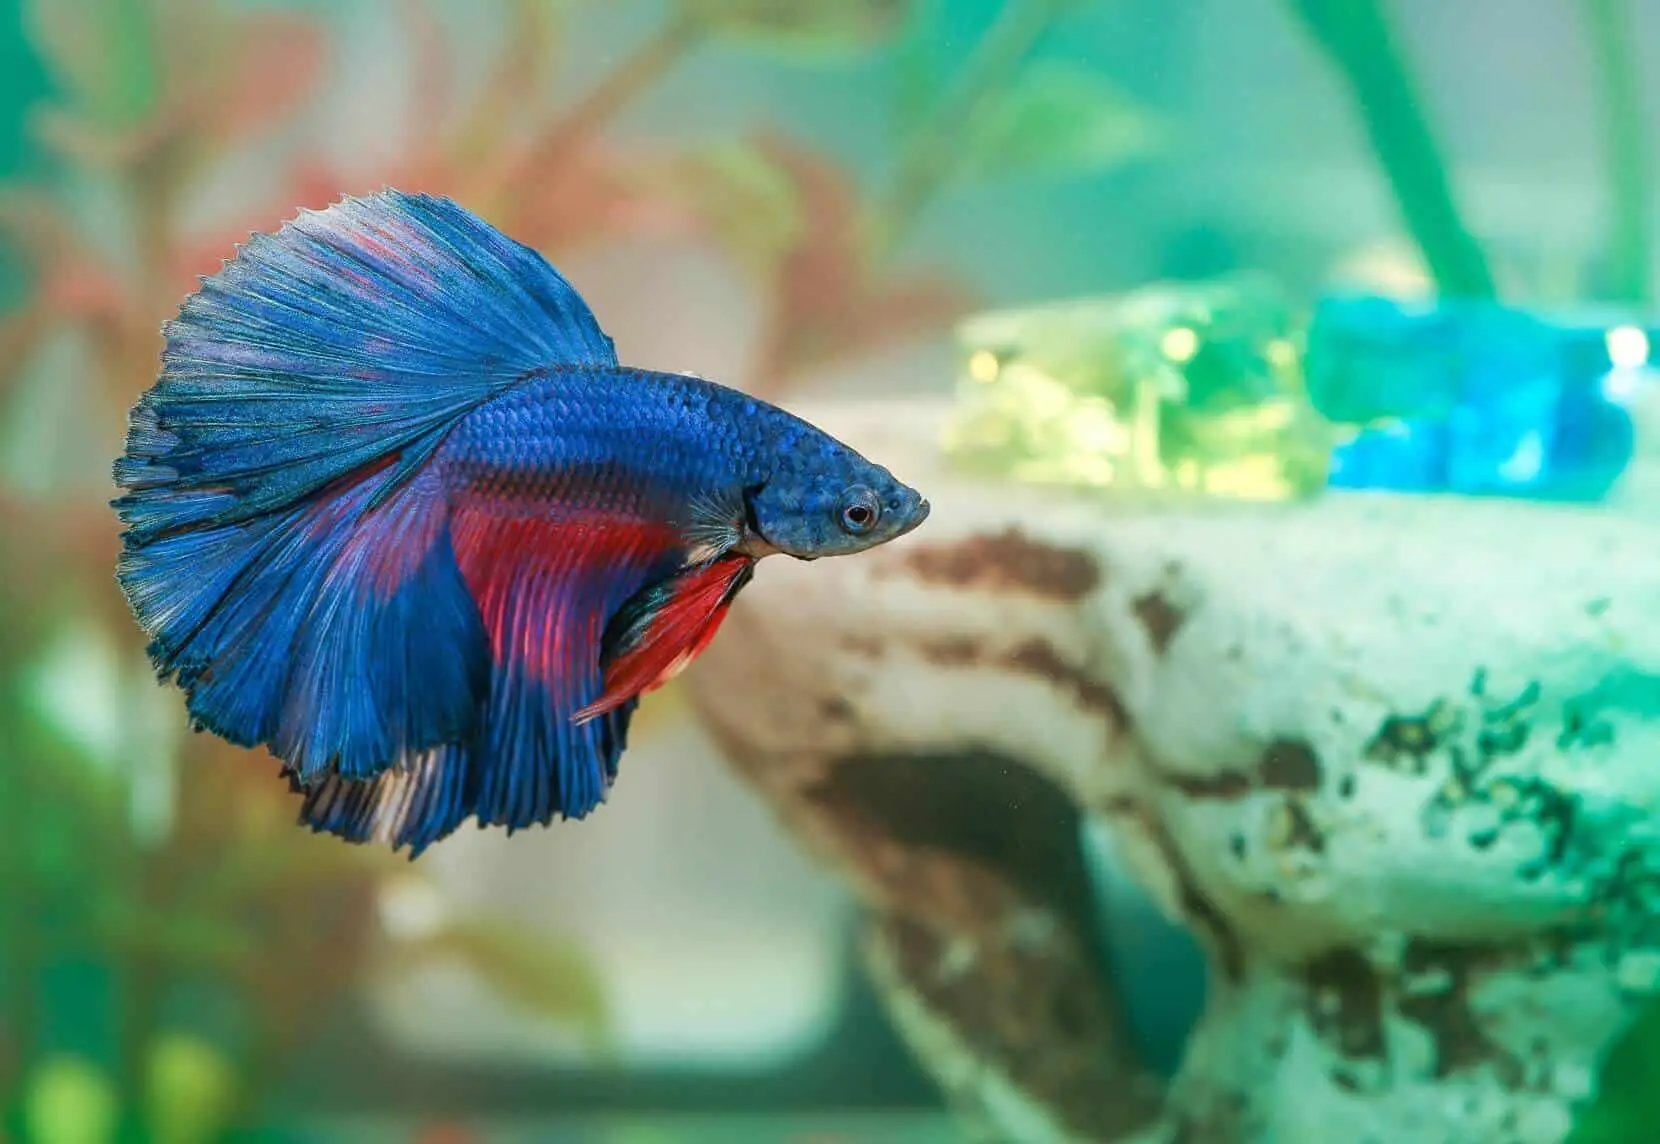 How Long Do Betta Fish Live 5 Tips To Increase Their Lifespan Fishkeeping World,Best Washing Machines In India